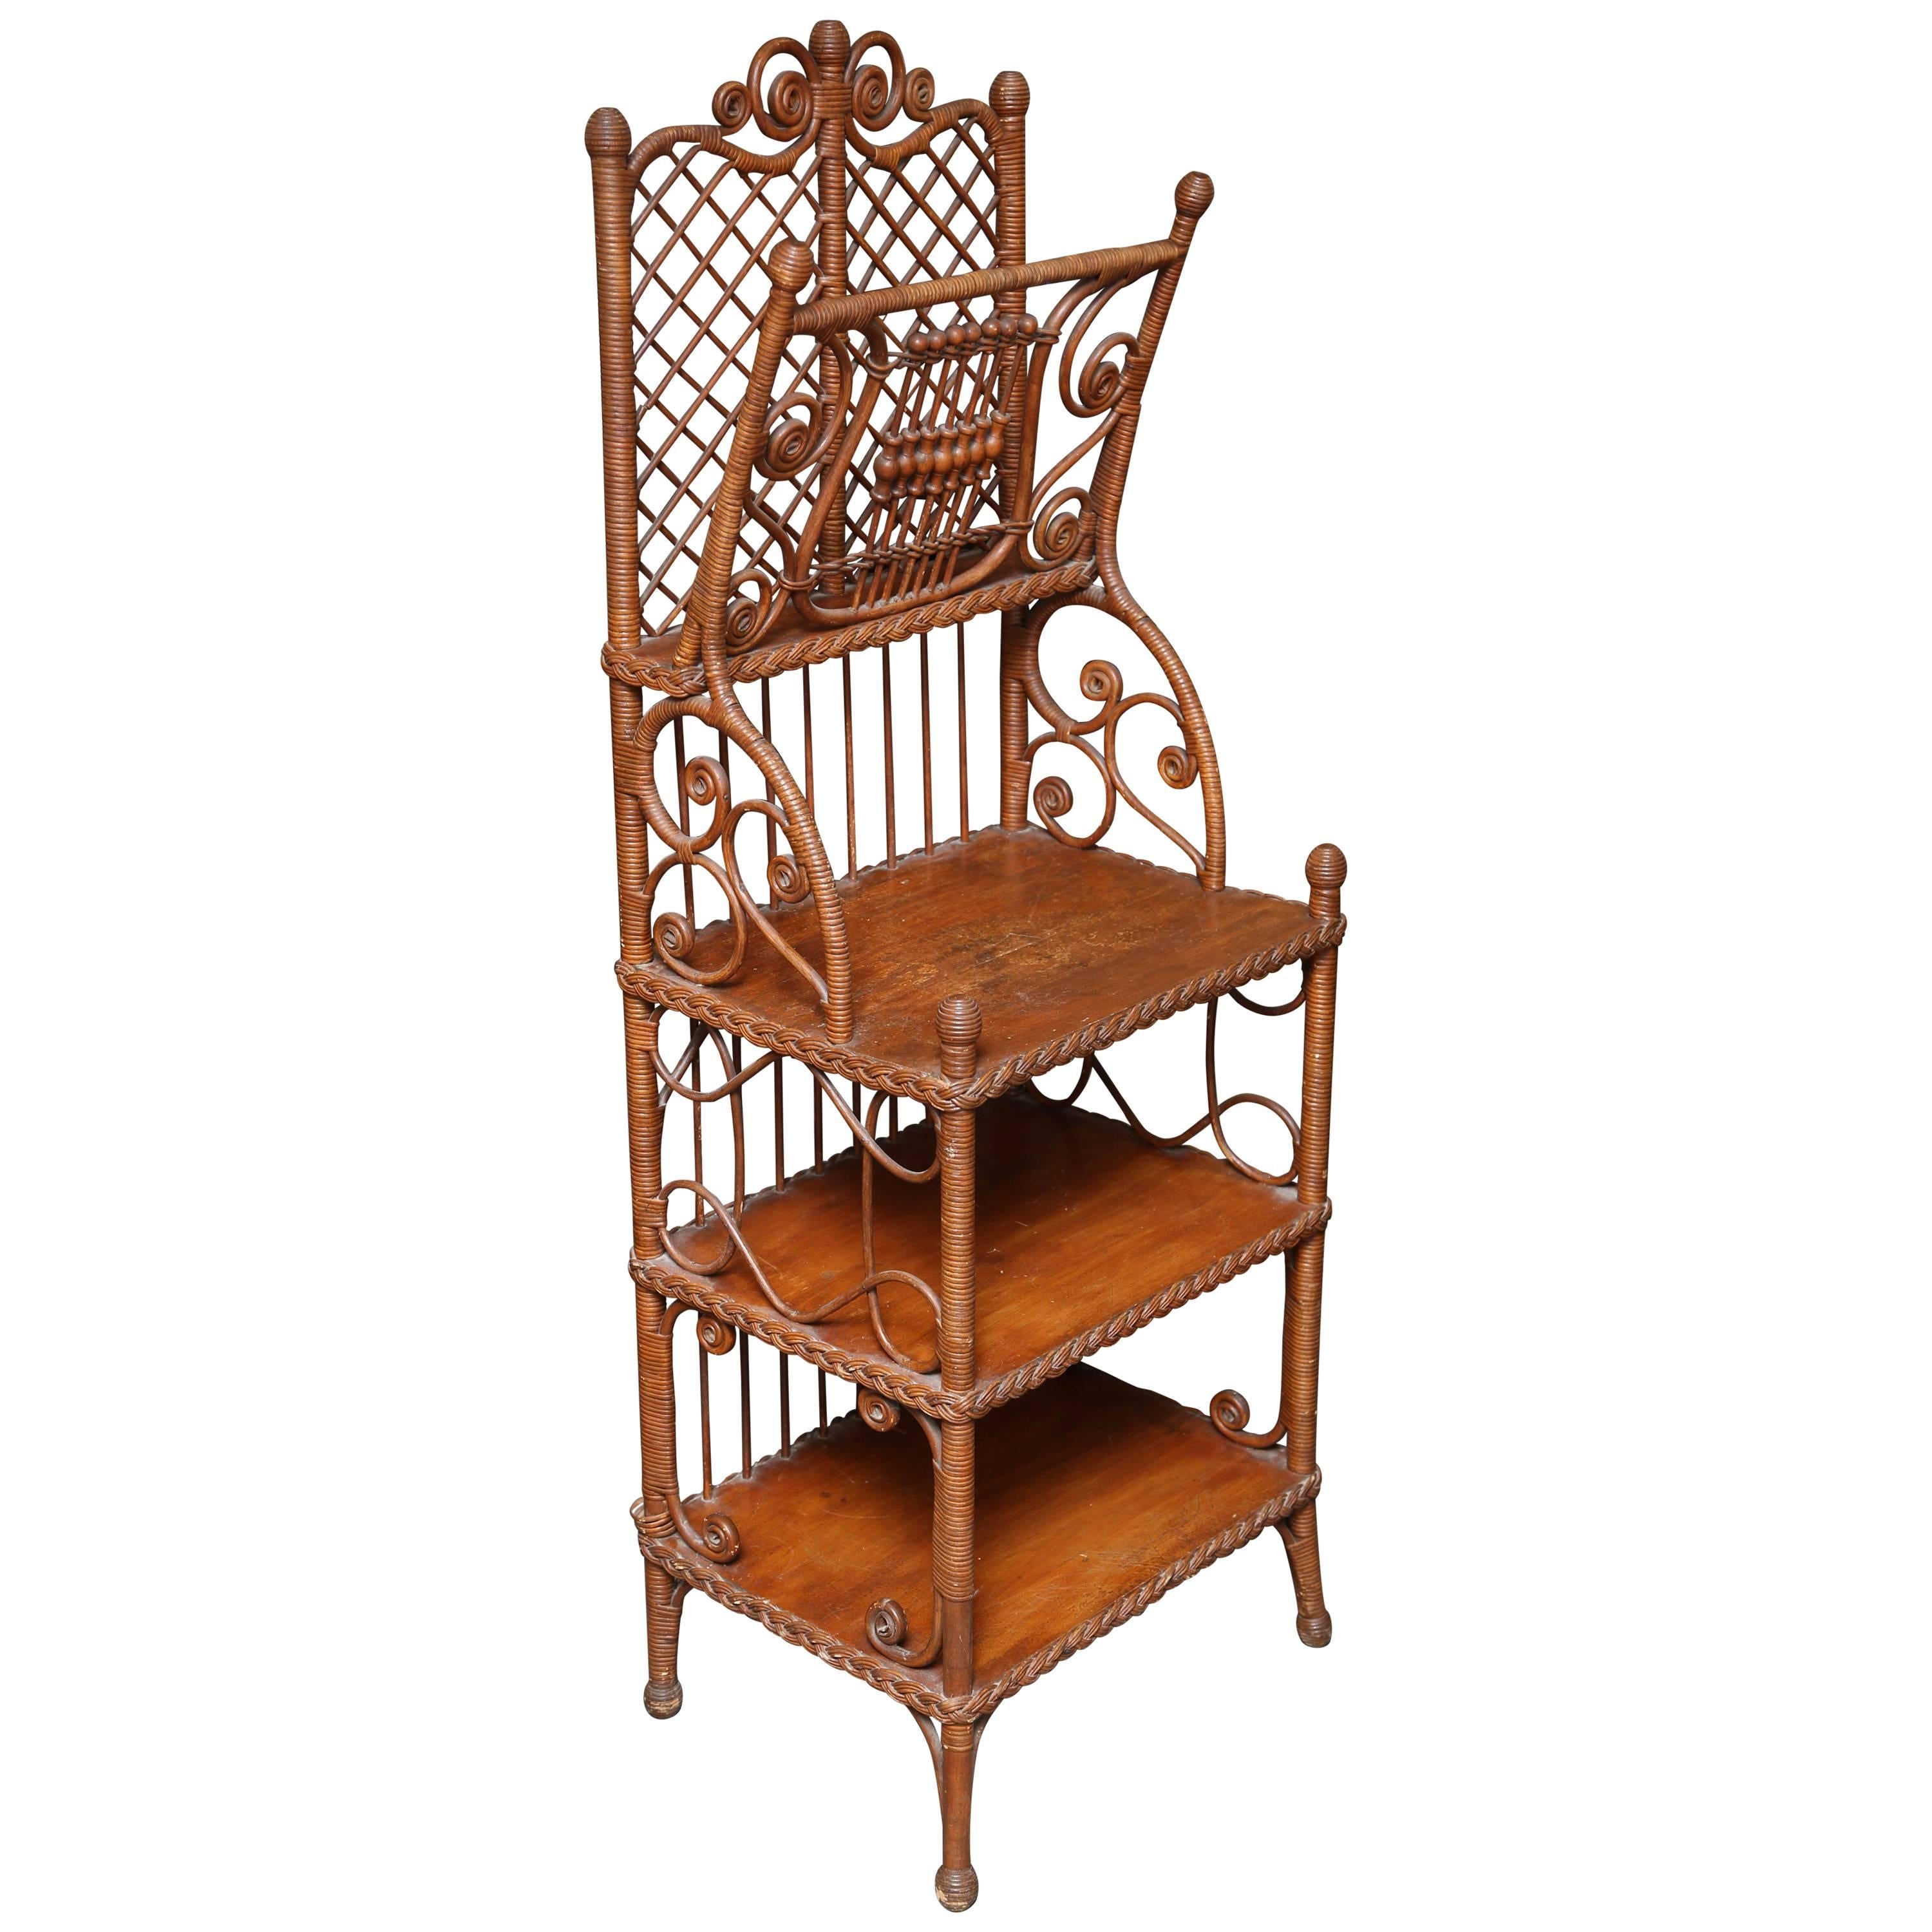 Whimsical 19th Century Wicker Music / Book Stand